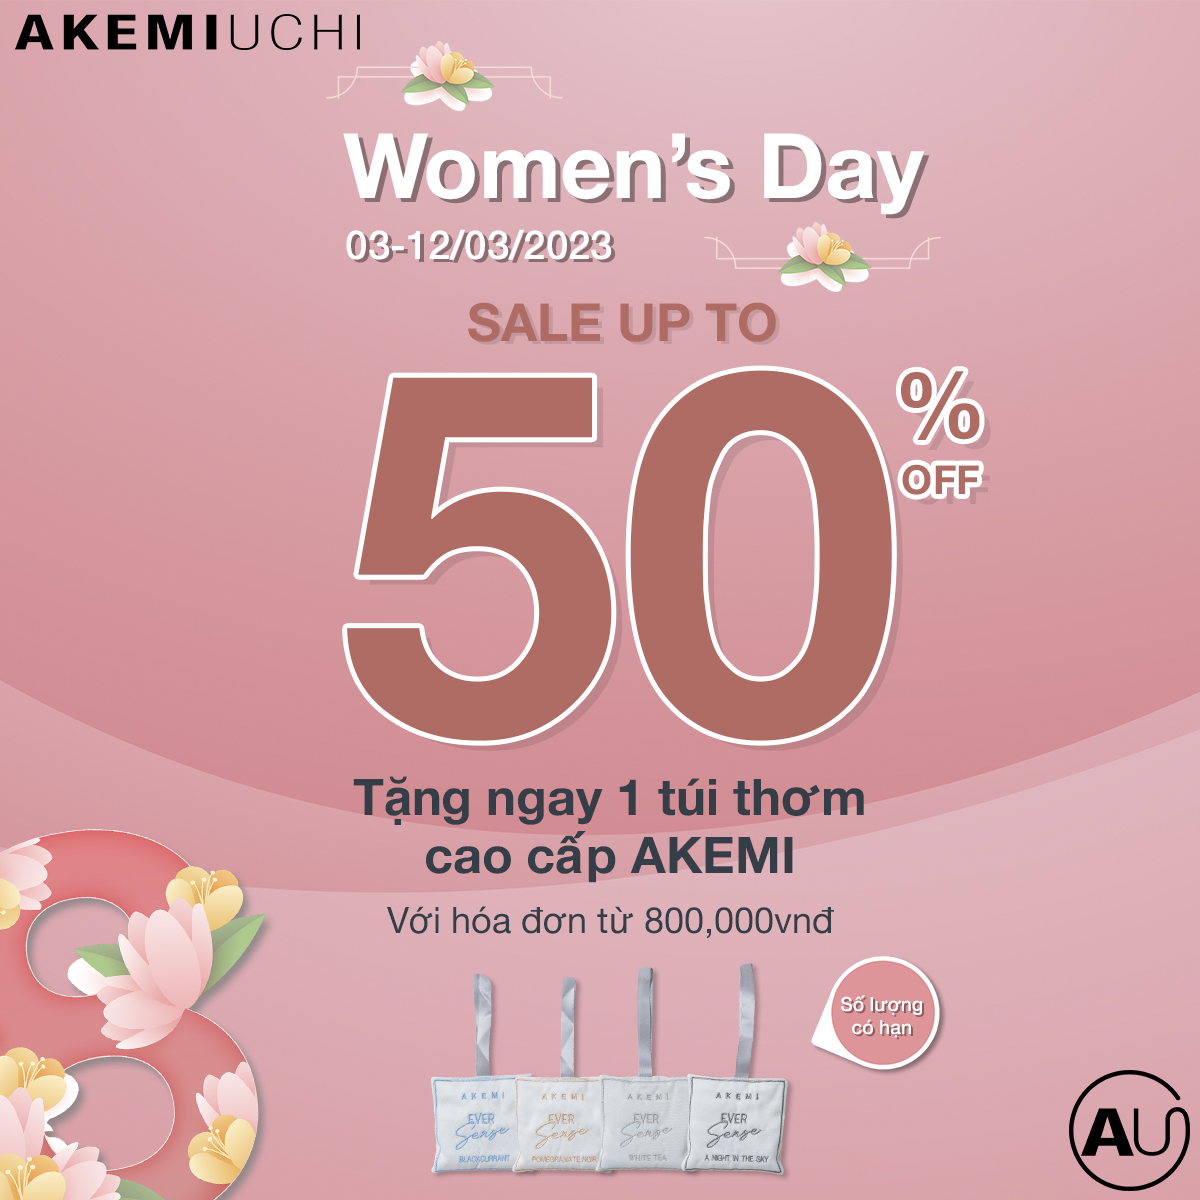 🎁HAPPY WOMEN'S DAY - AKEMI SCENTED SACHET WITH LOVE